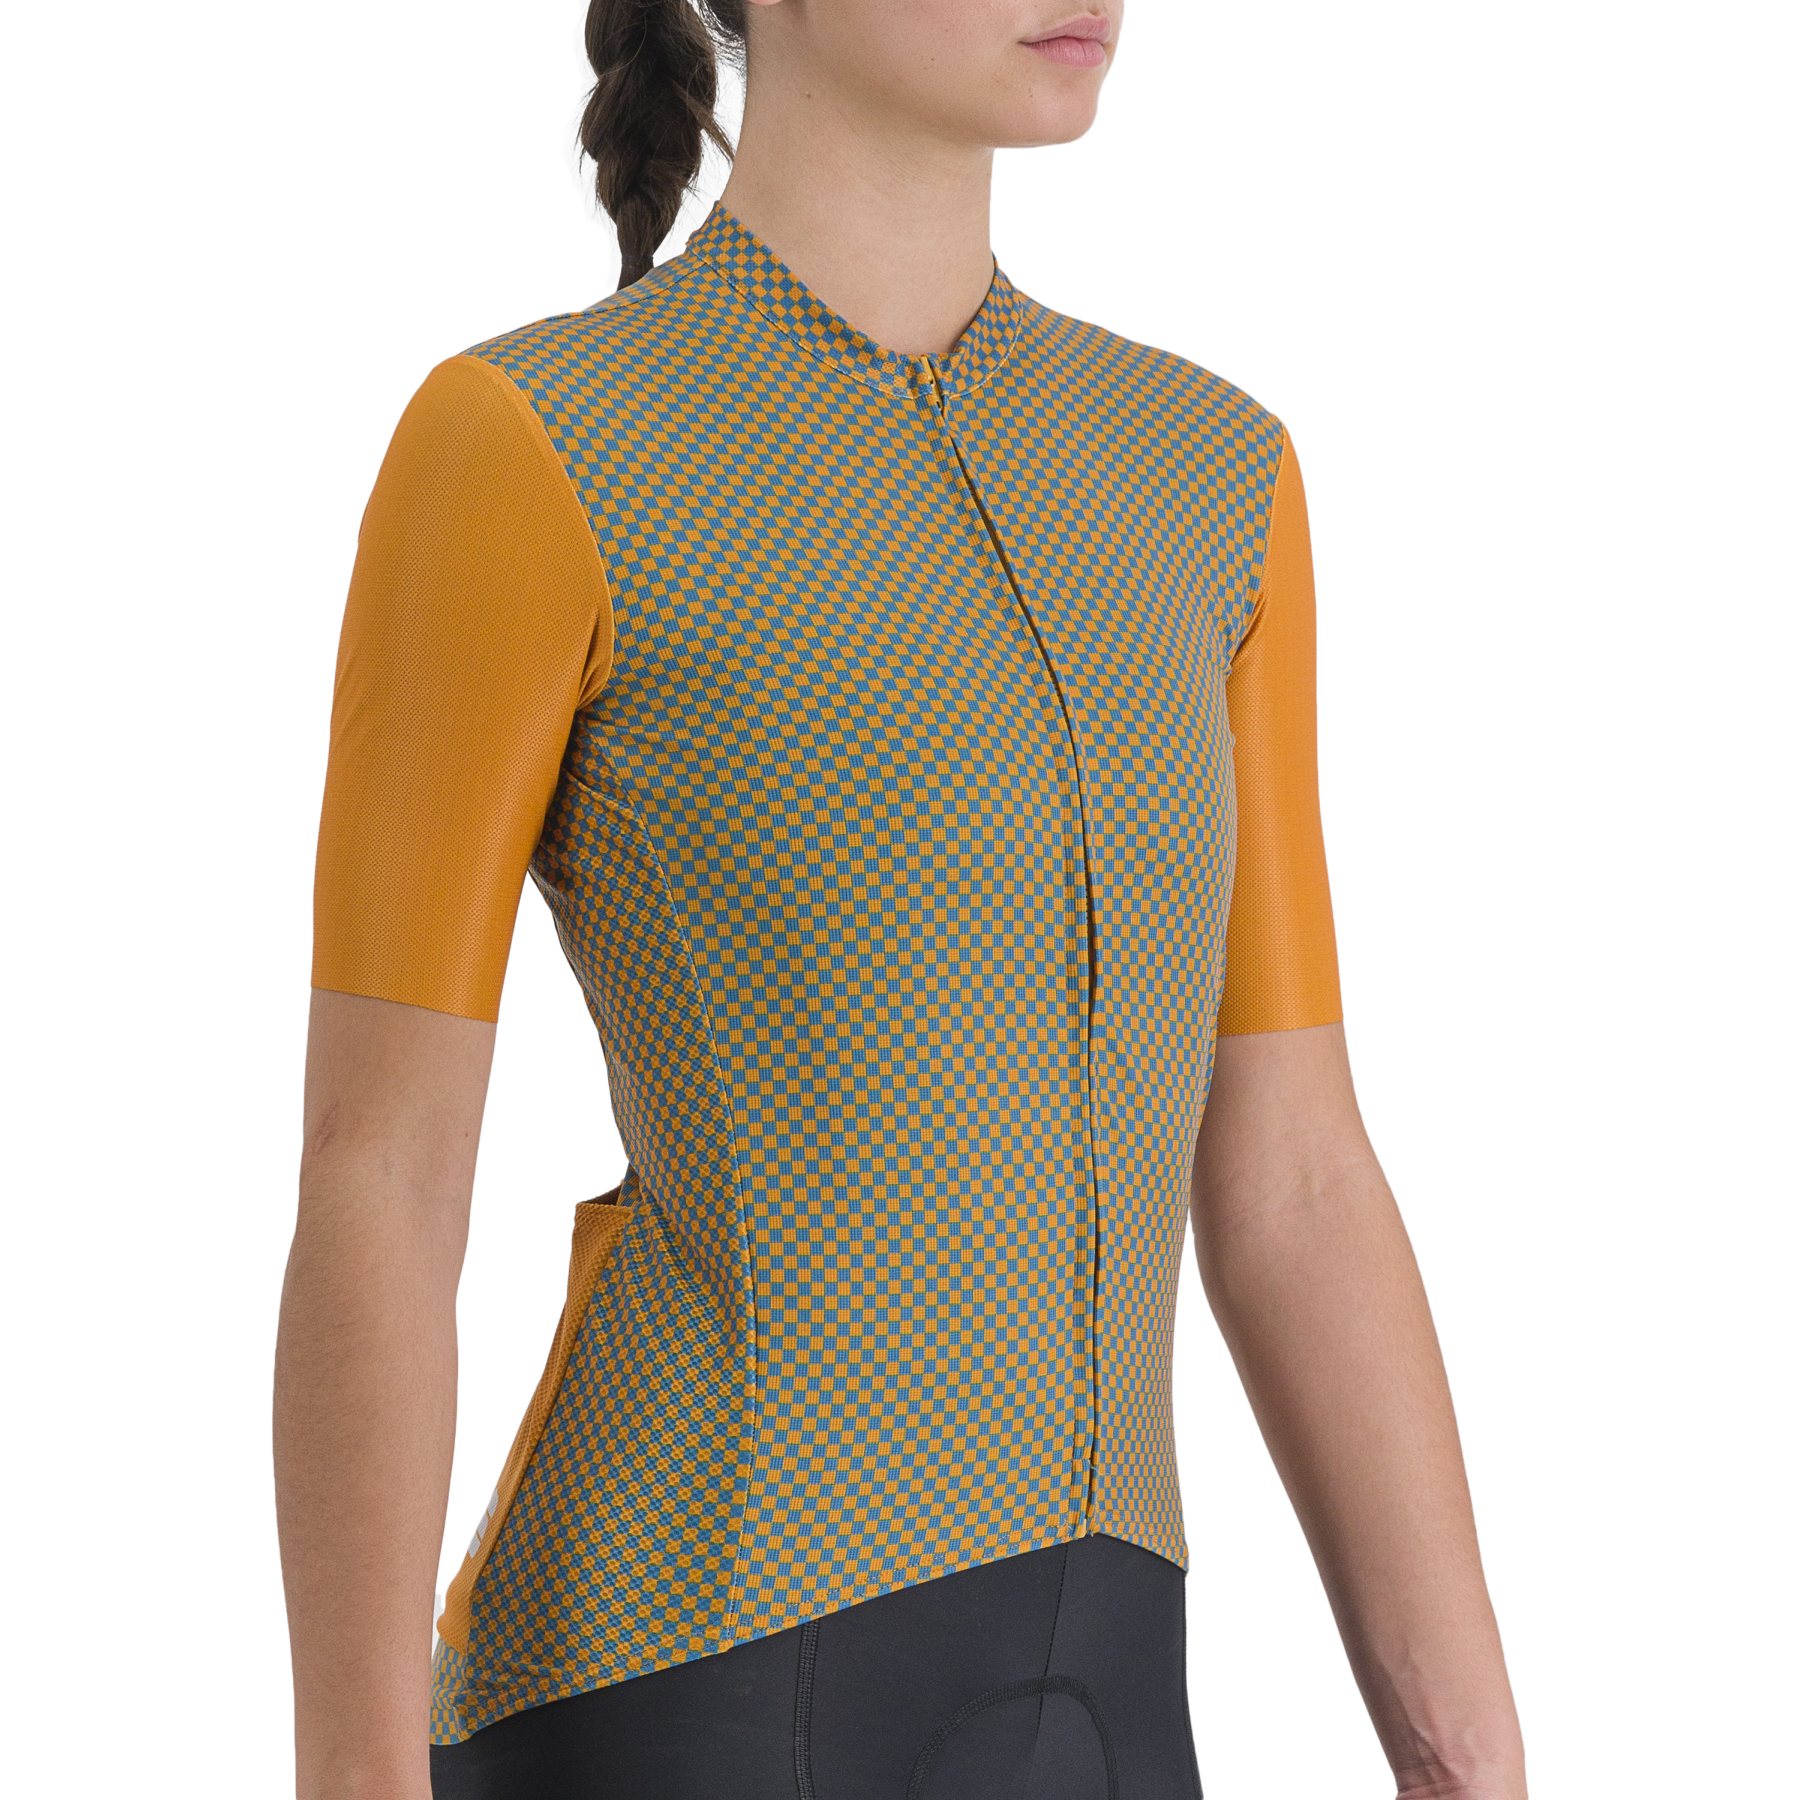 Image of Sportful Checkmate Jersey Women - 261 Dark Gold Berry Blue